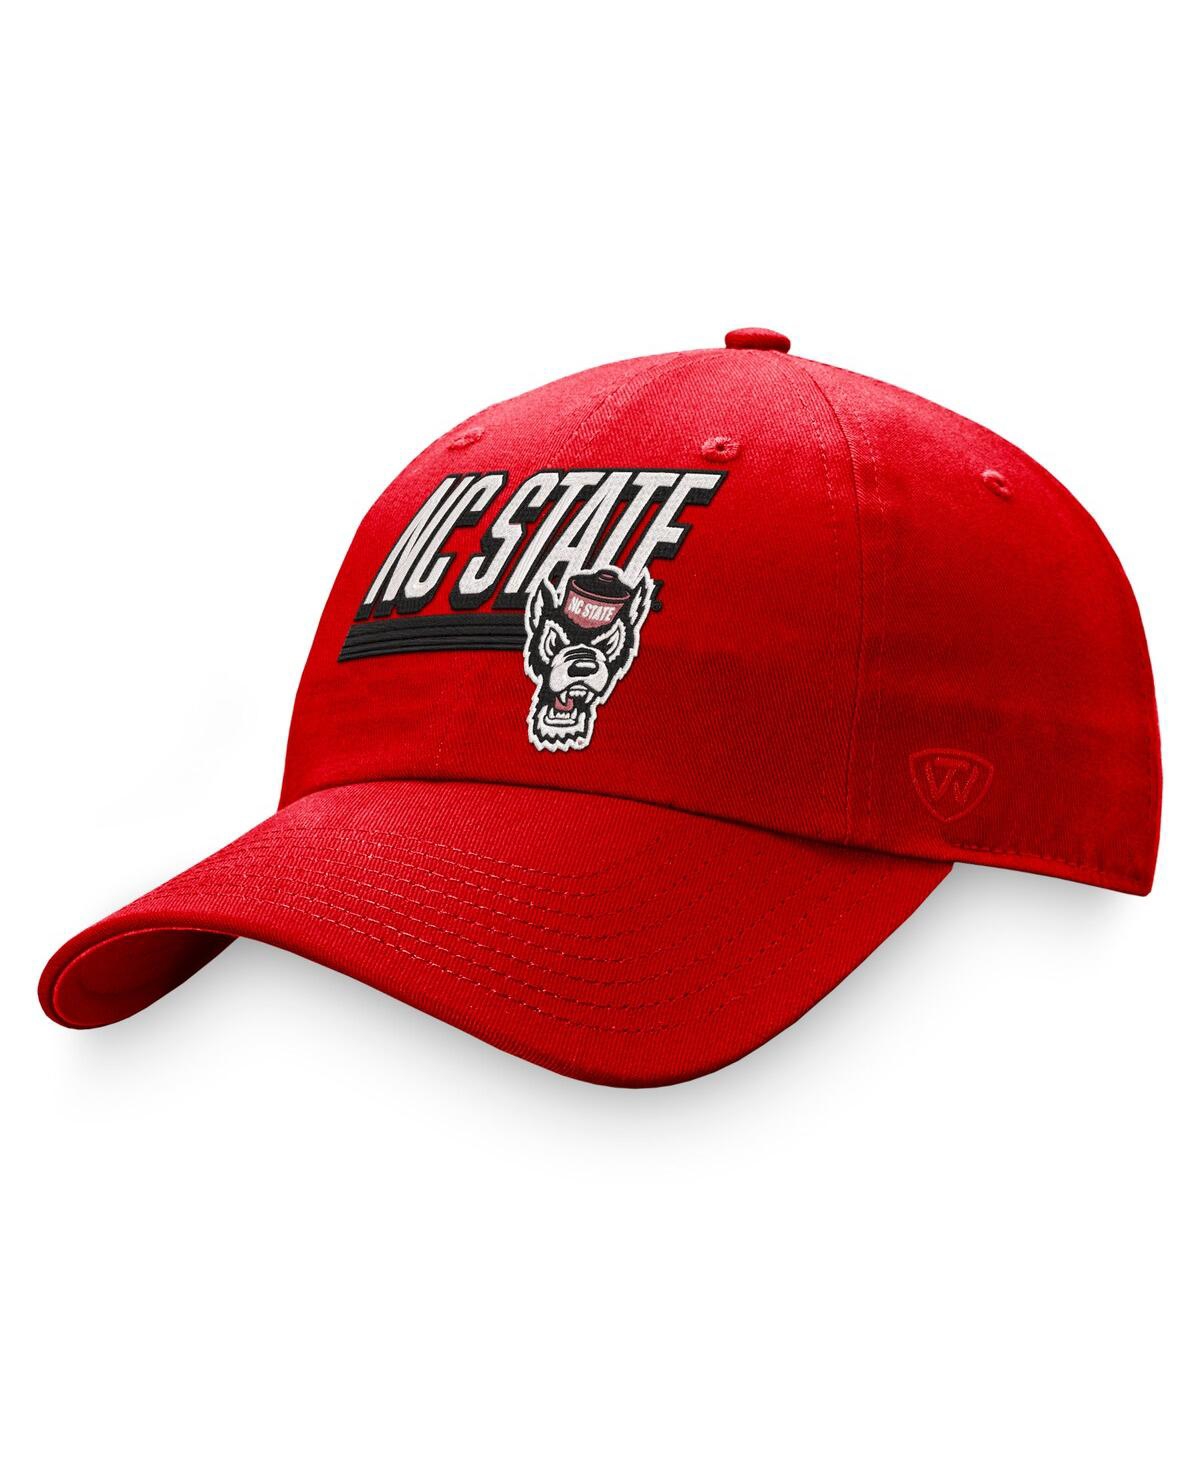 Shop Top Of The World Men's  Red Nc State Wolfpack Slice Adjustable Hat